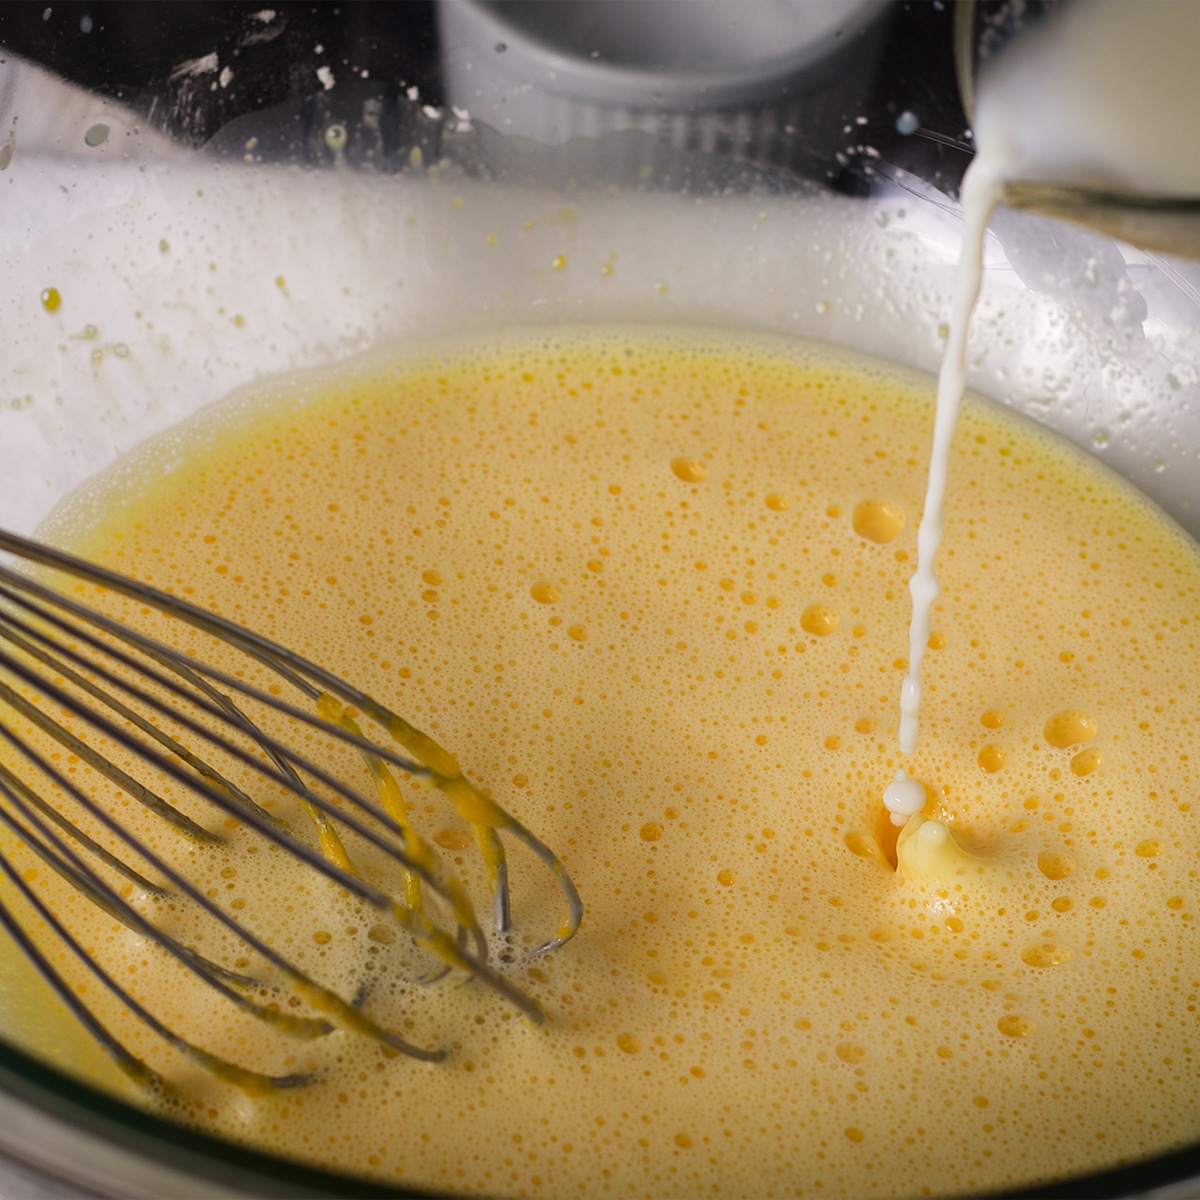 Pouring hot milk slowly into egg yolks while whisking.